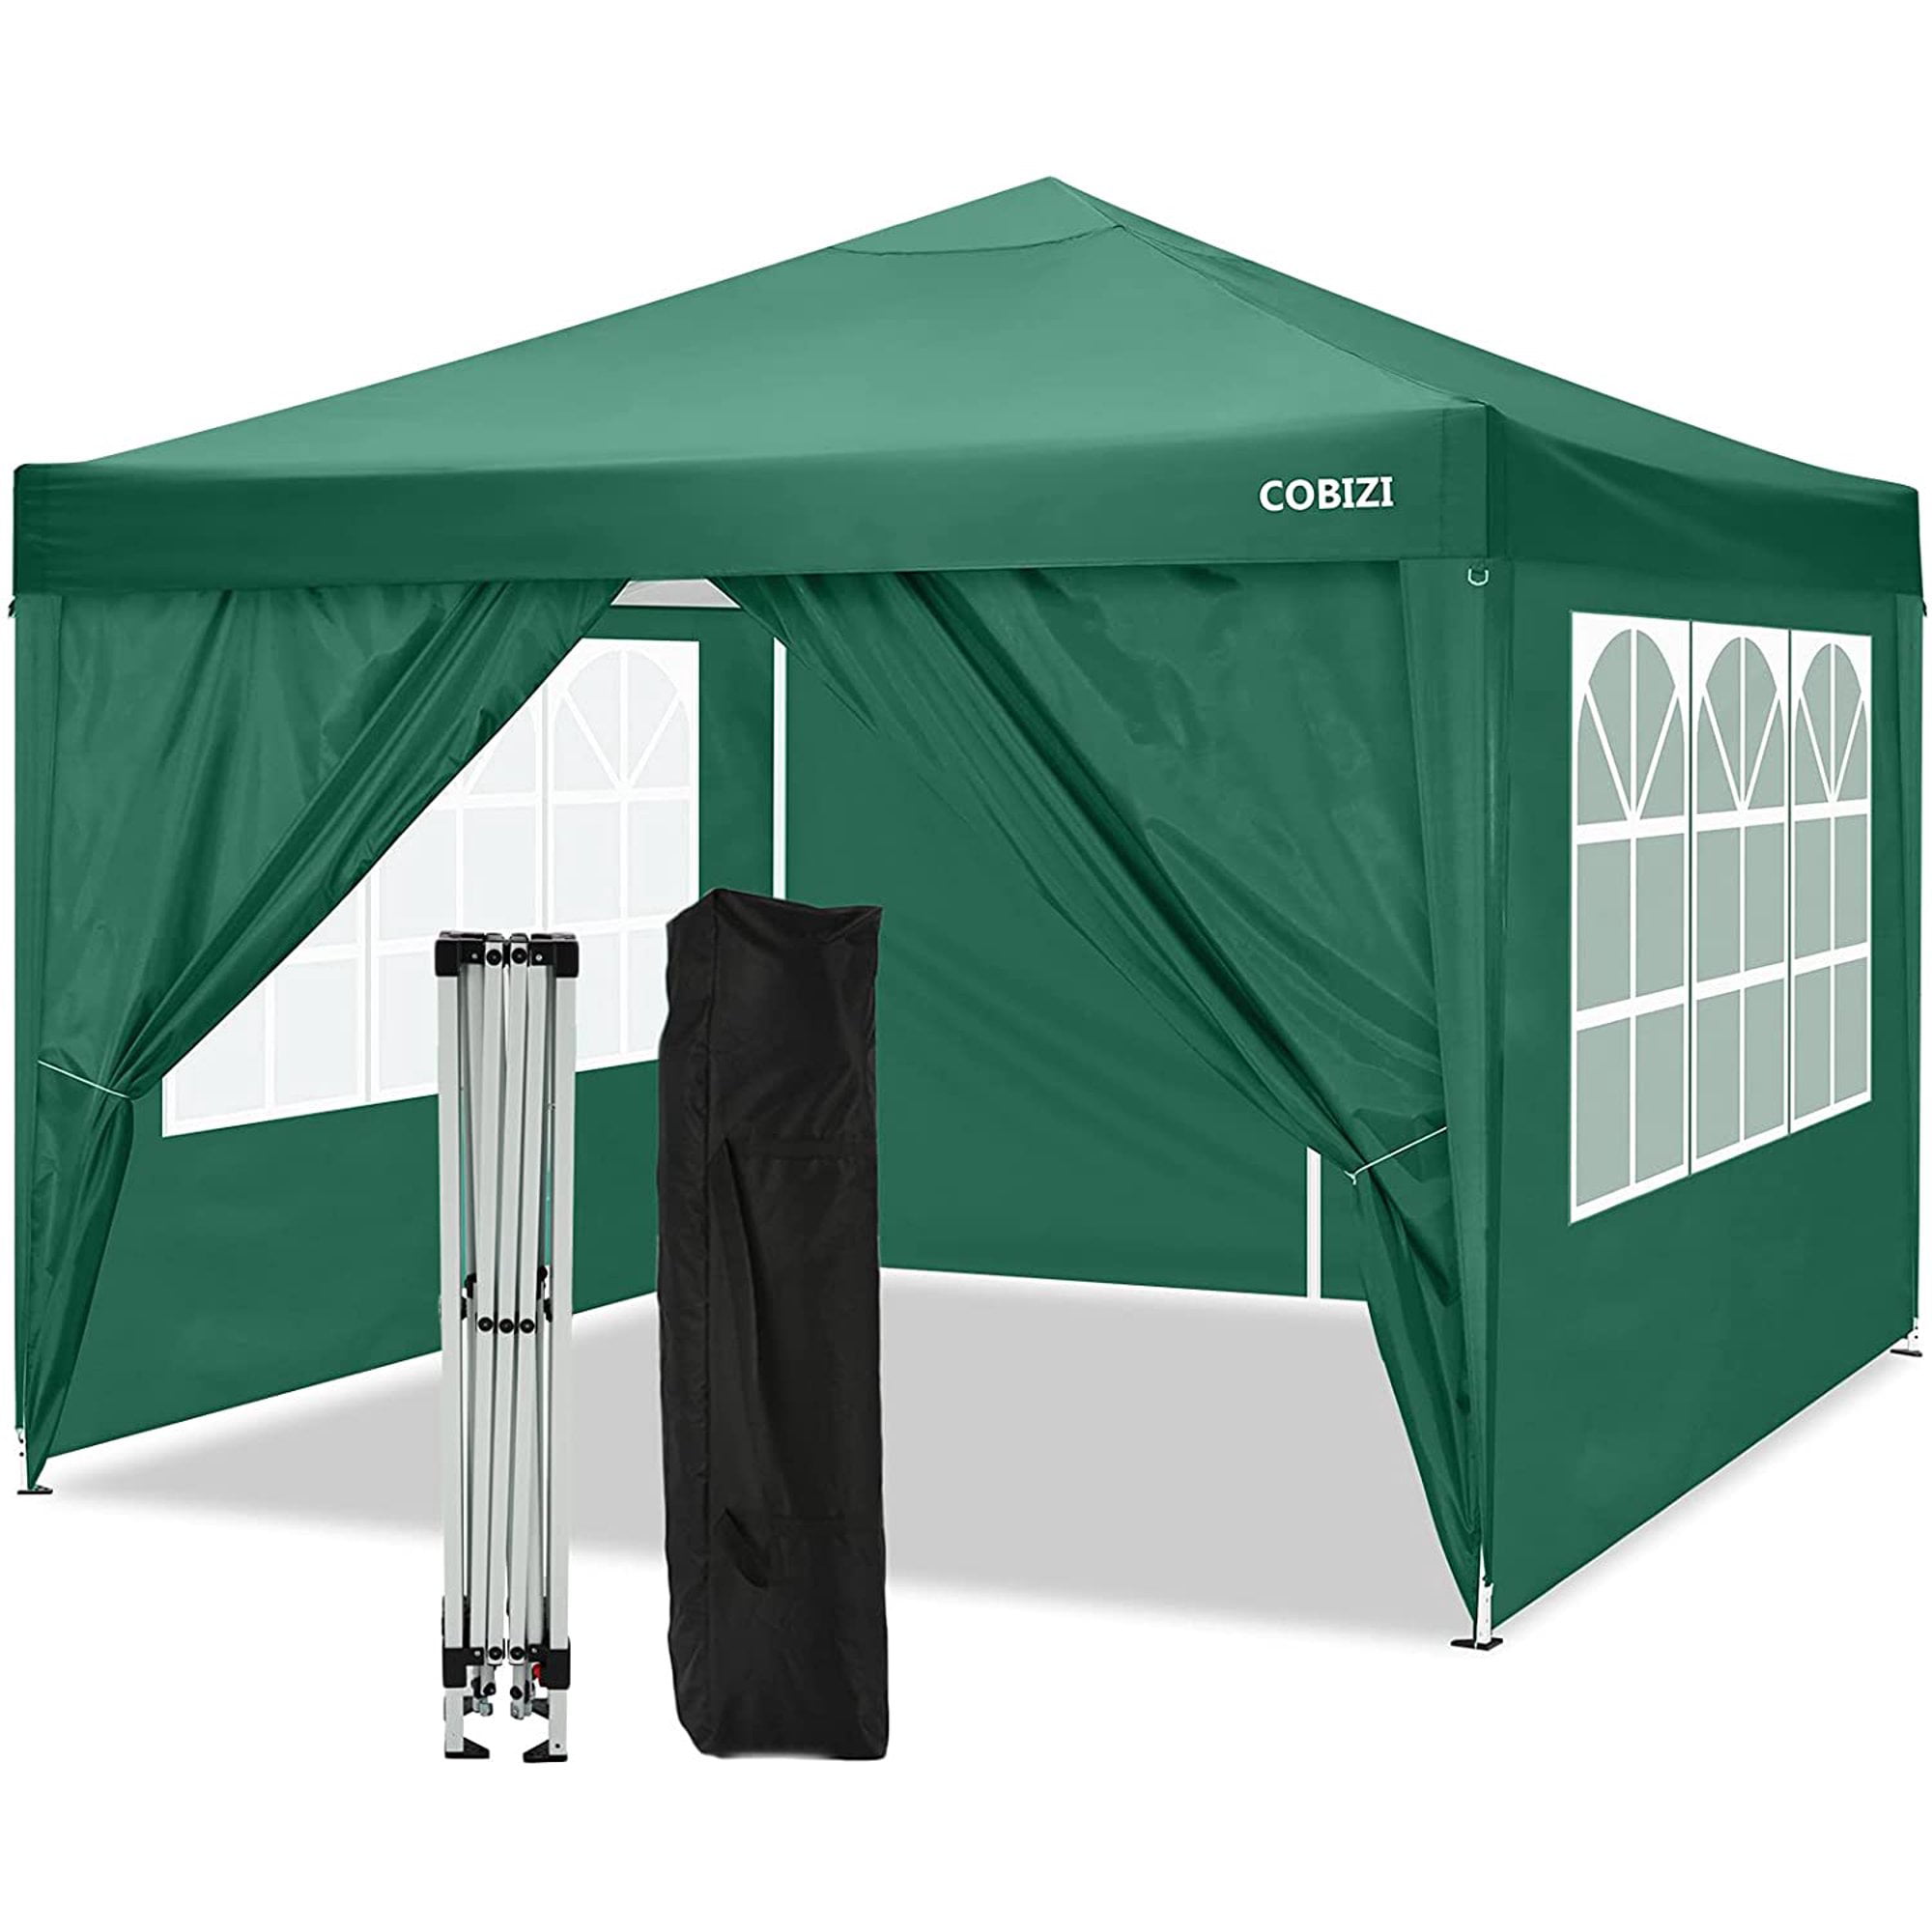 10'x10' Ez Pop-up Capony Wedding Party Tent w/ 1 Sidewall and Carry Bag Green 